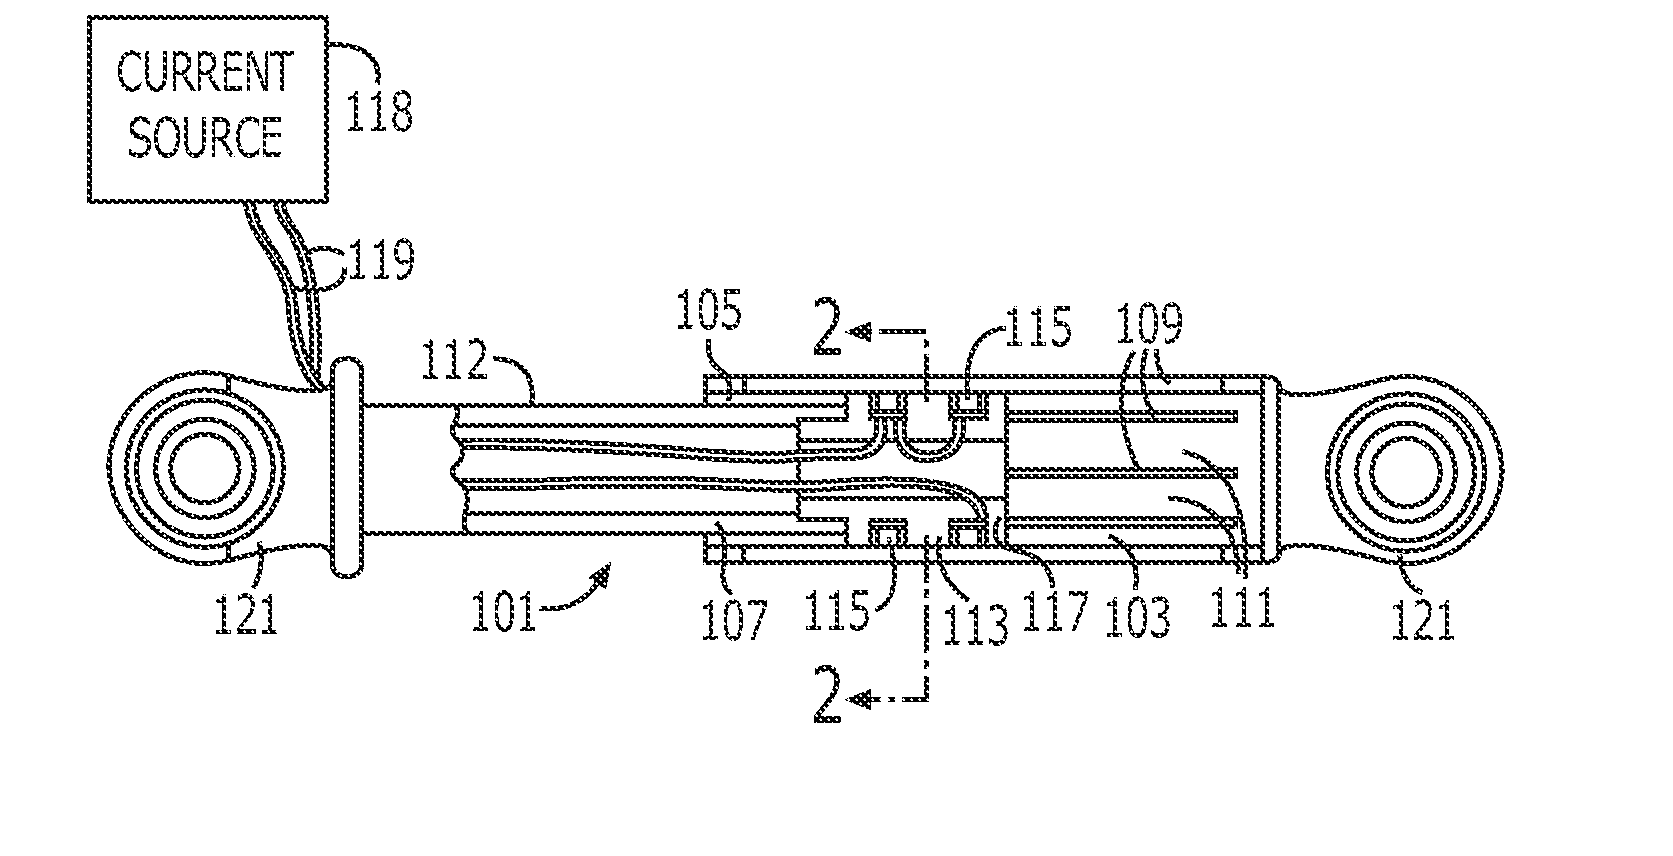 System comprising magnetically actuated motion control device